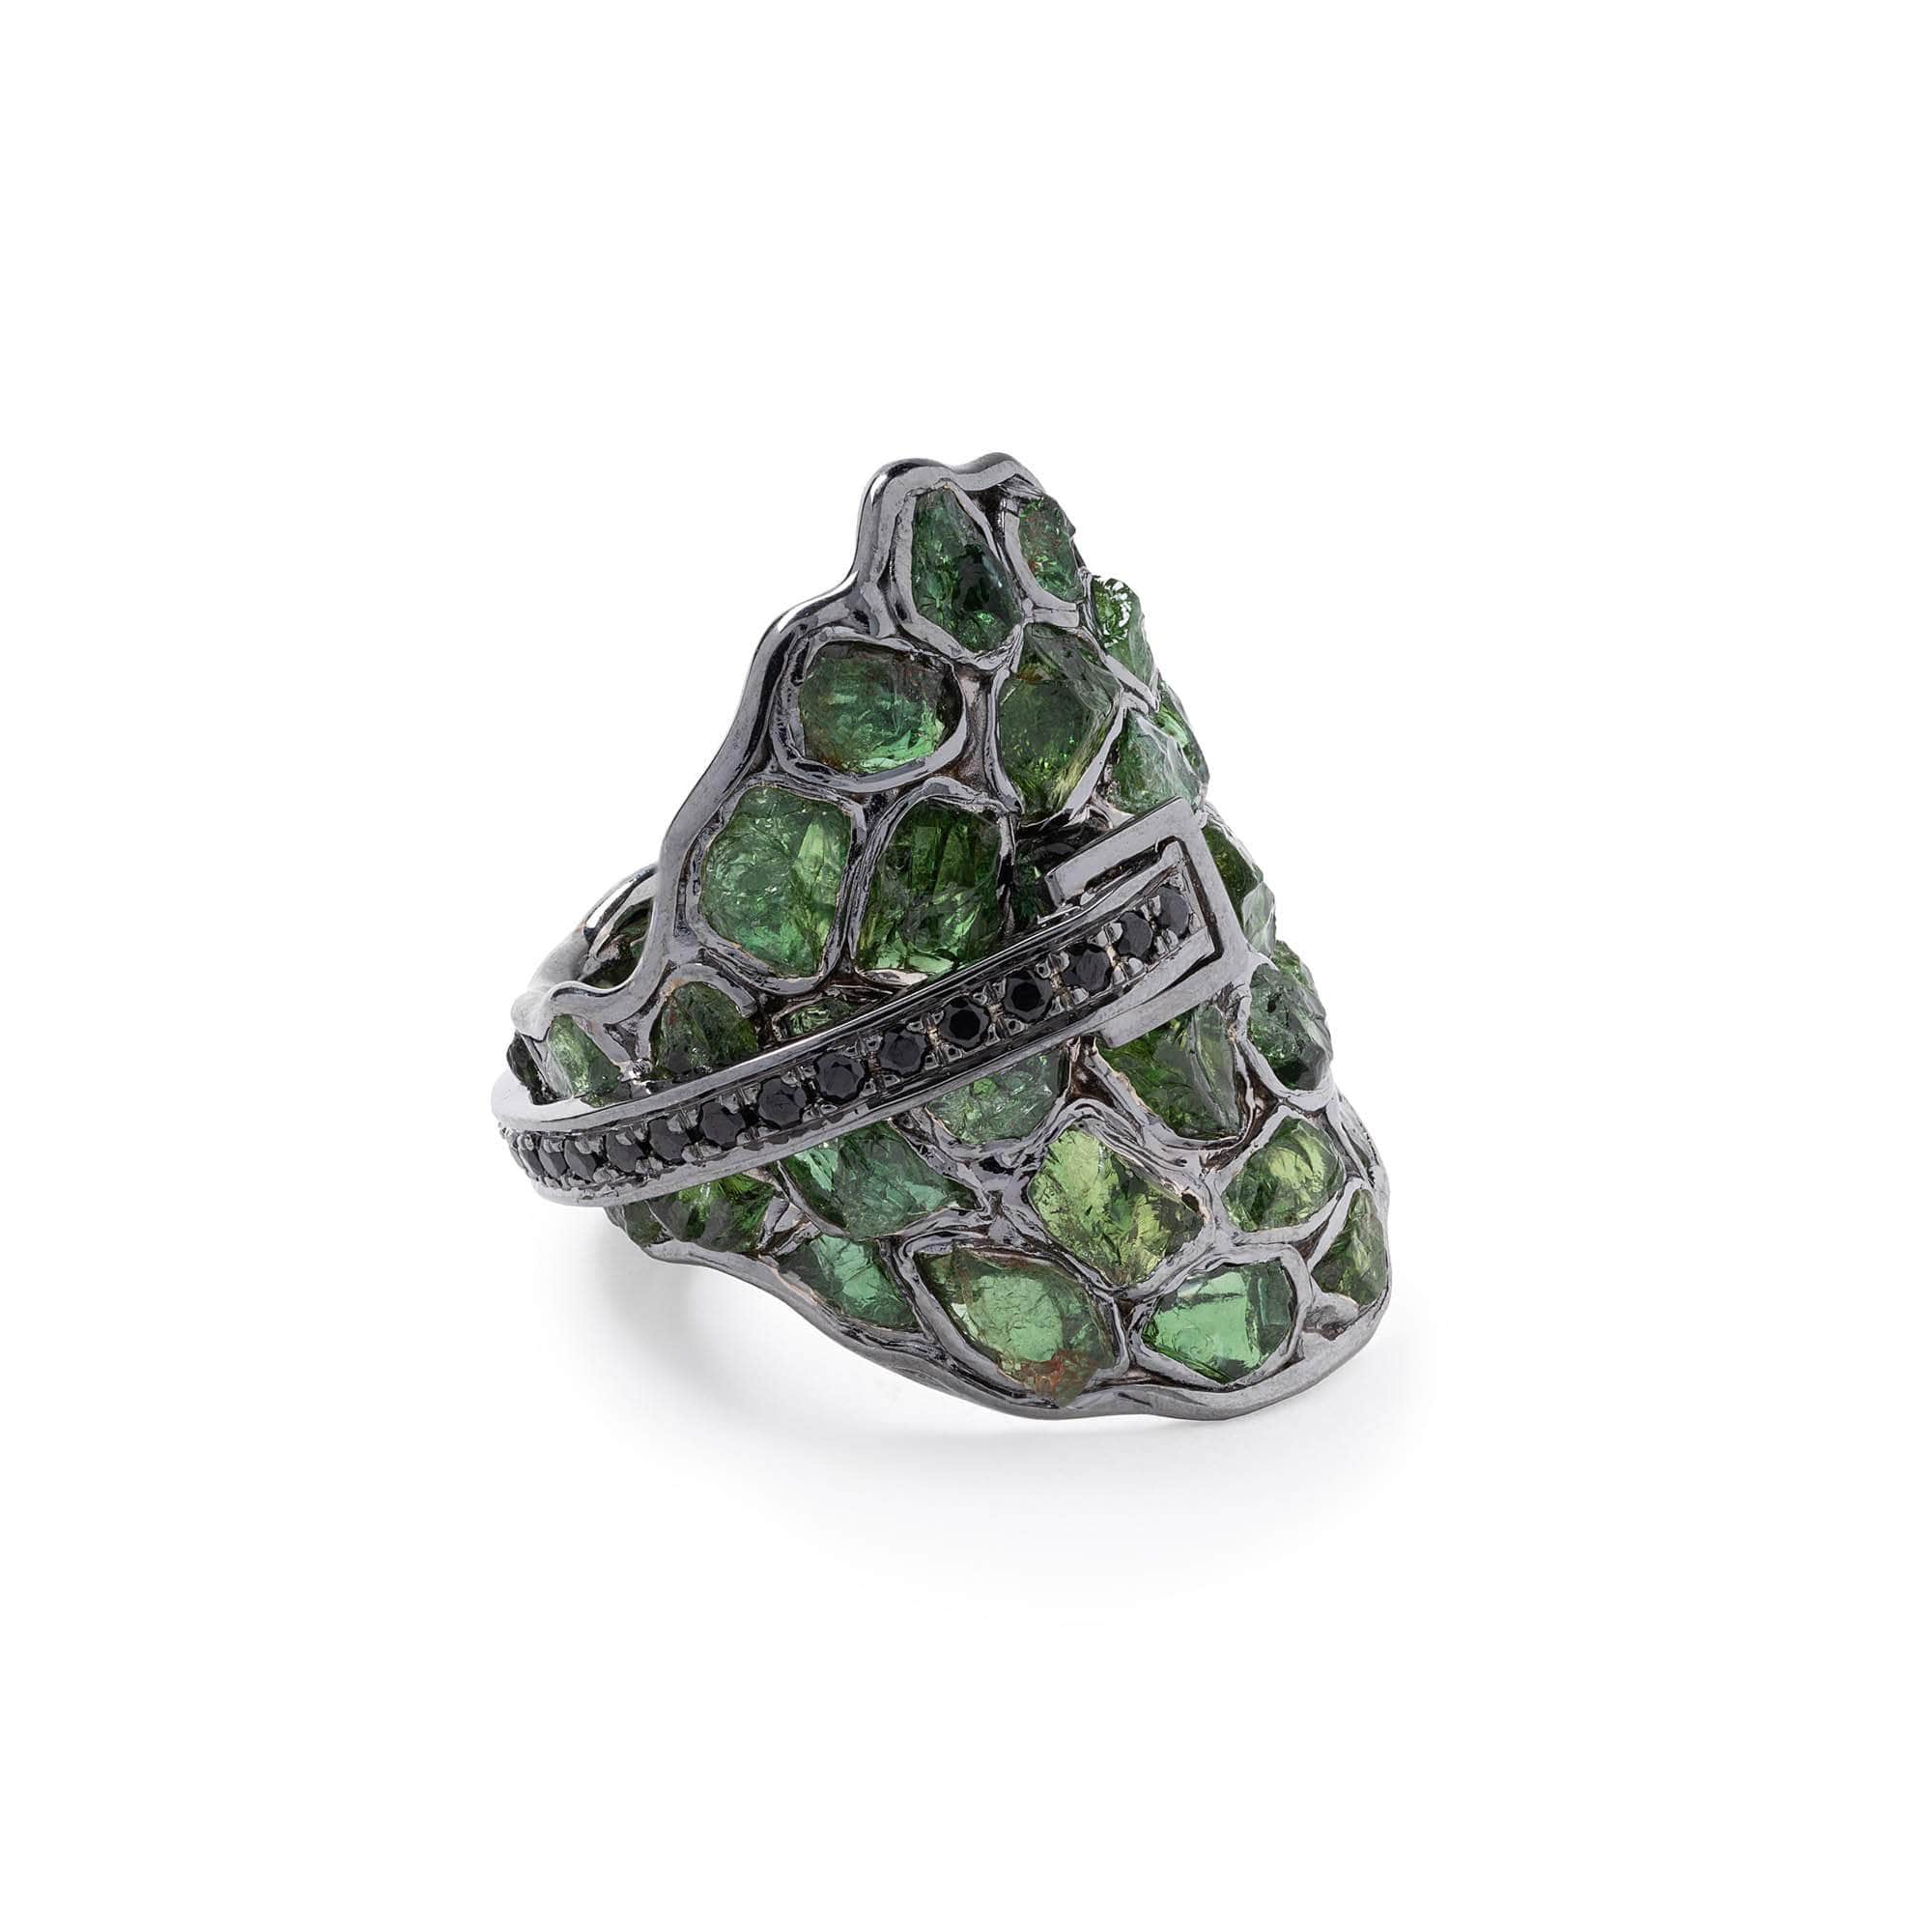 Chaza Rough Chrome Diopside and Spinel Ring GERMAN KABIRSKI